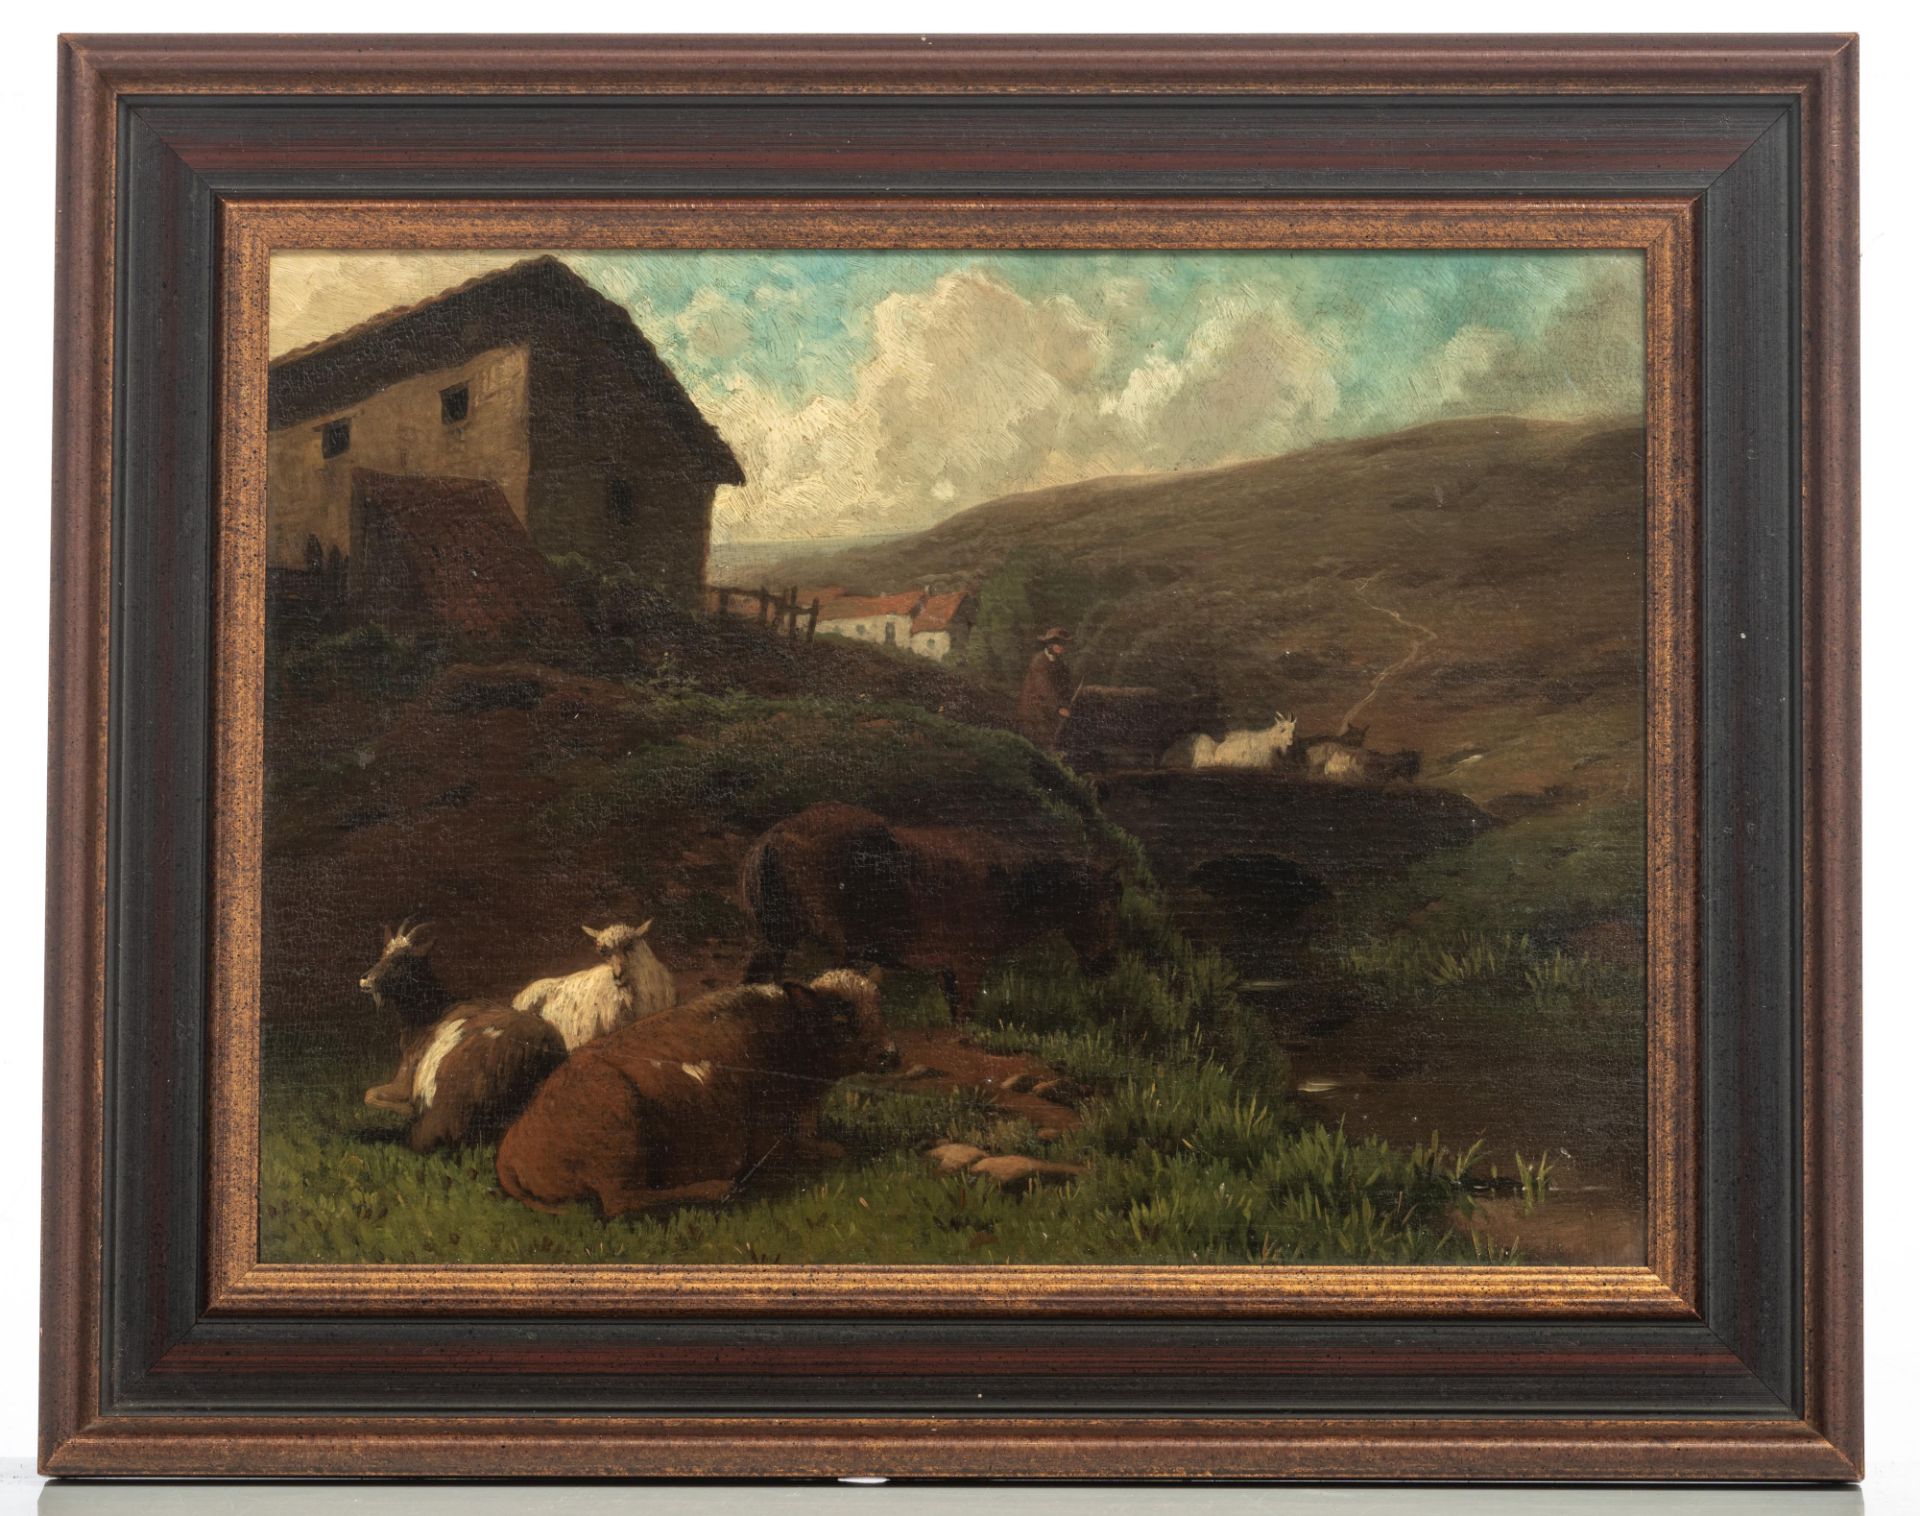 A mountainous and bucolic landscape, 18thC, 25,5 x 34,5 cm - Image 2 of 7